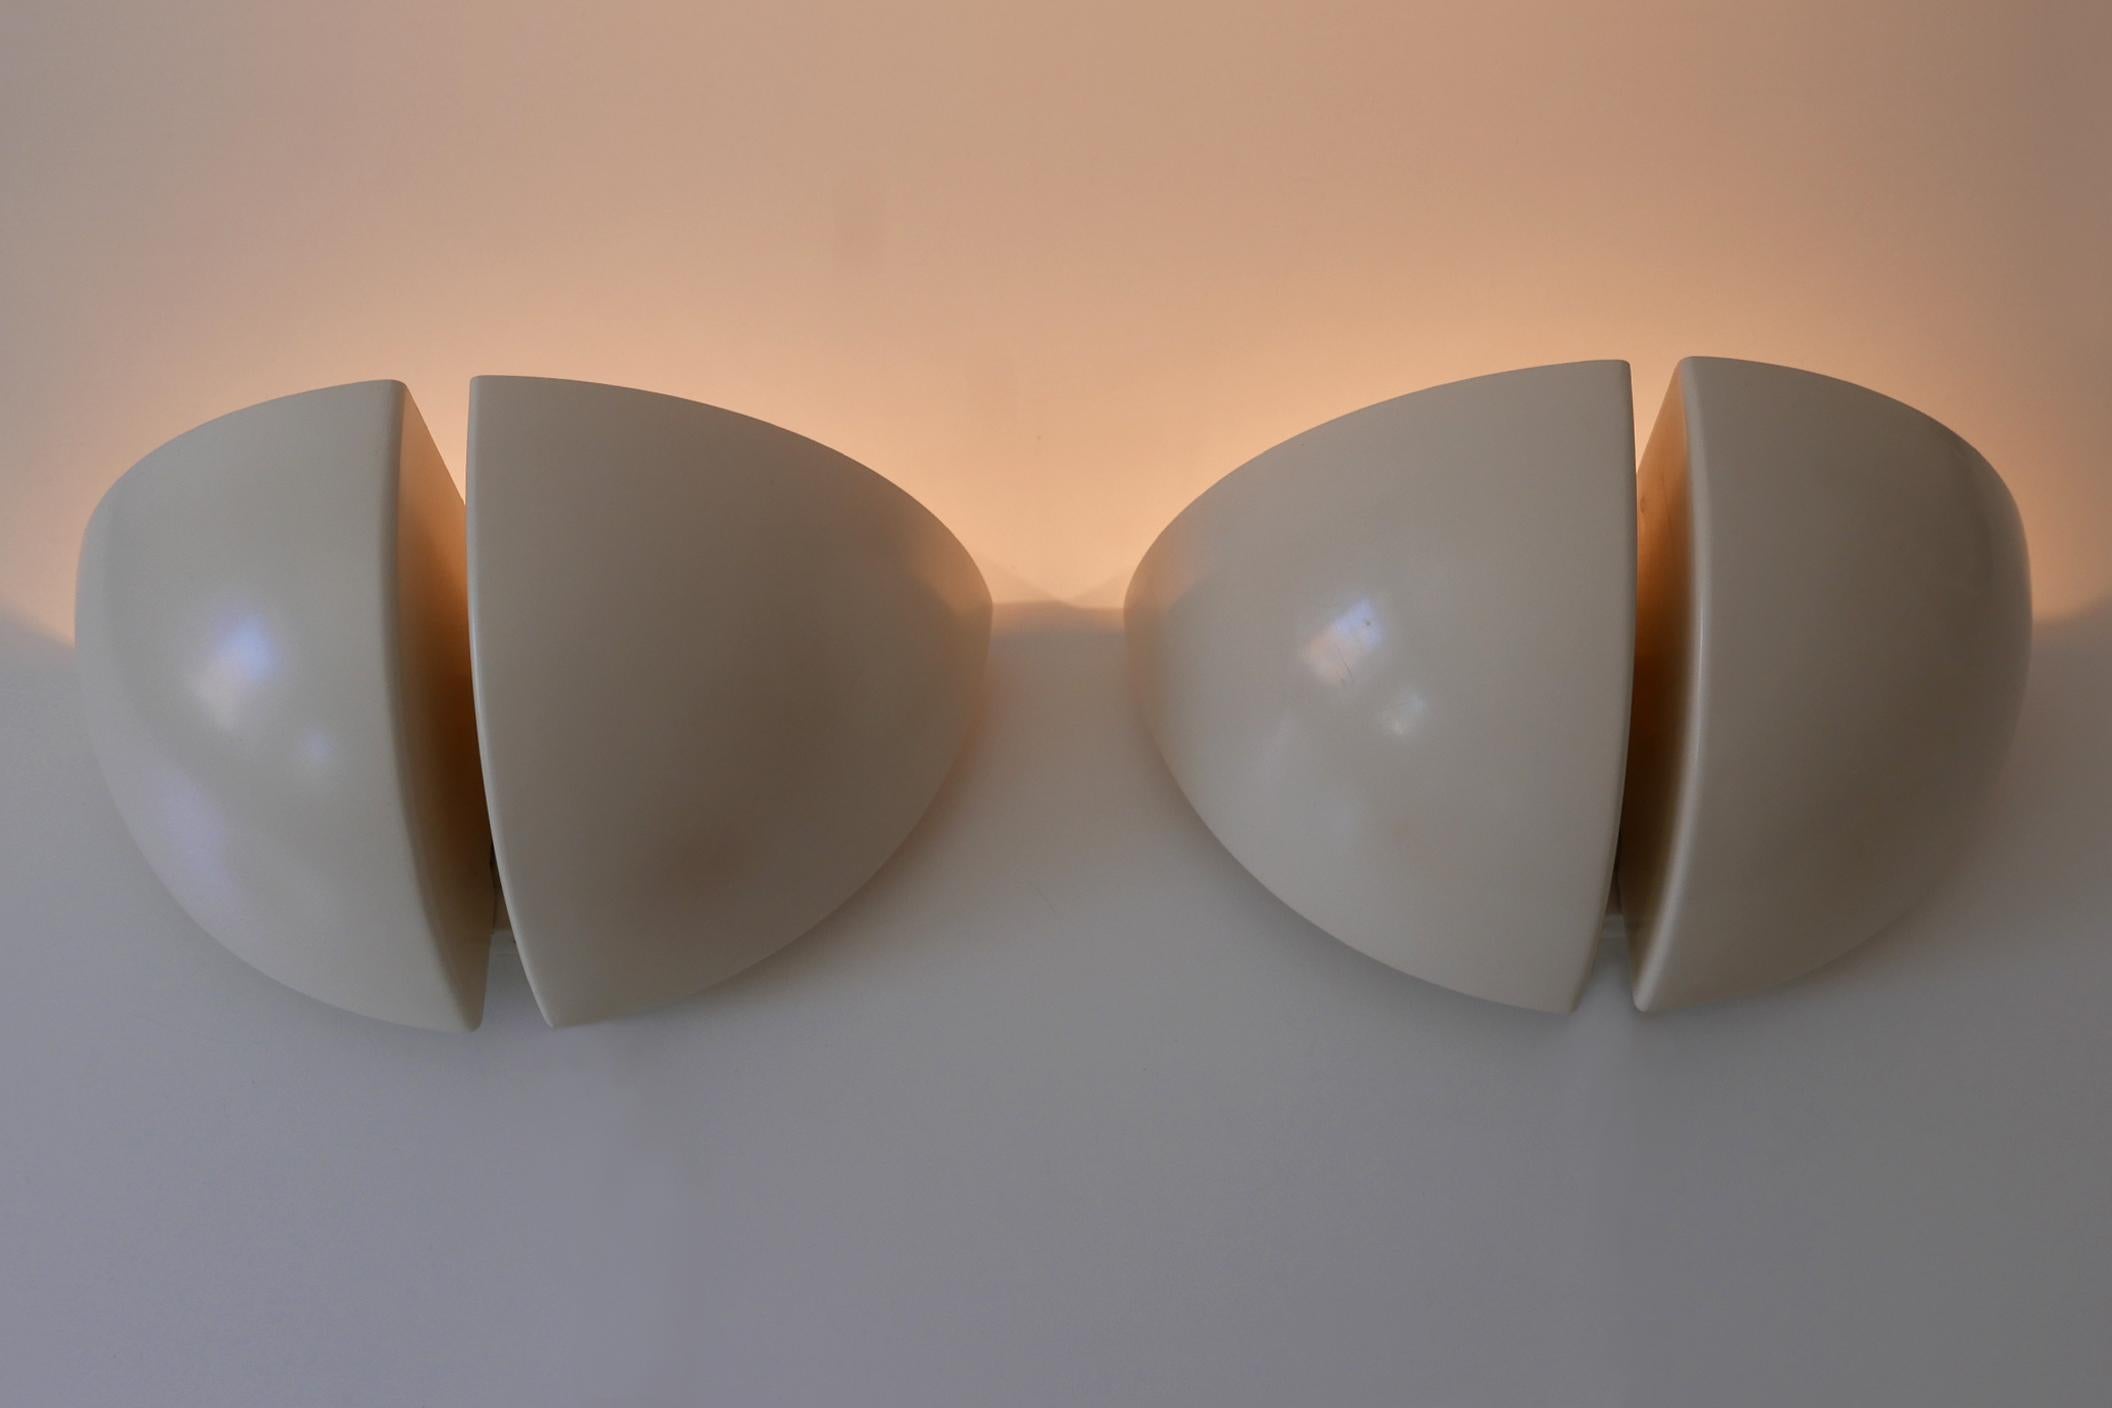 Set of two award winning minimalistic and elegant Mid-Century Modern Oktavo two-flamed wall lamps or sconces. Model C-1542. Designed and manufactured by RAAK, Netherlands, 1970s.

The Oktavo wall lamp which can be mounted up or downwards, won 1980